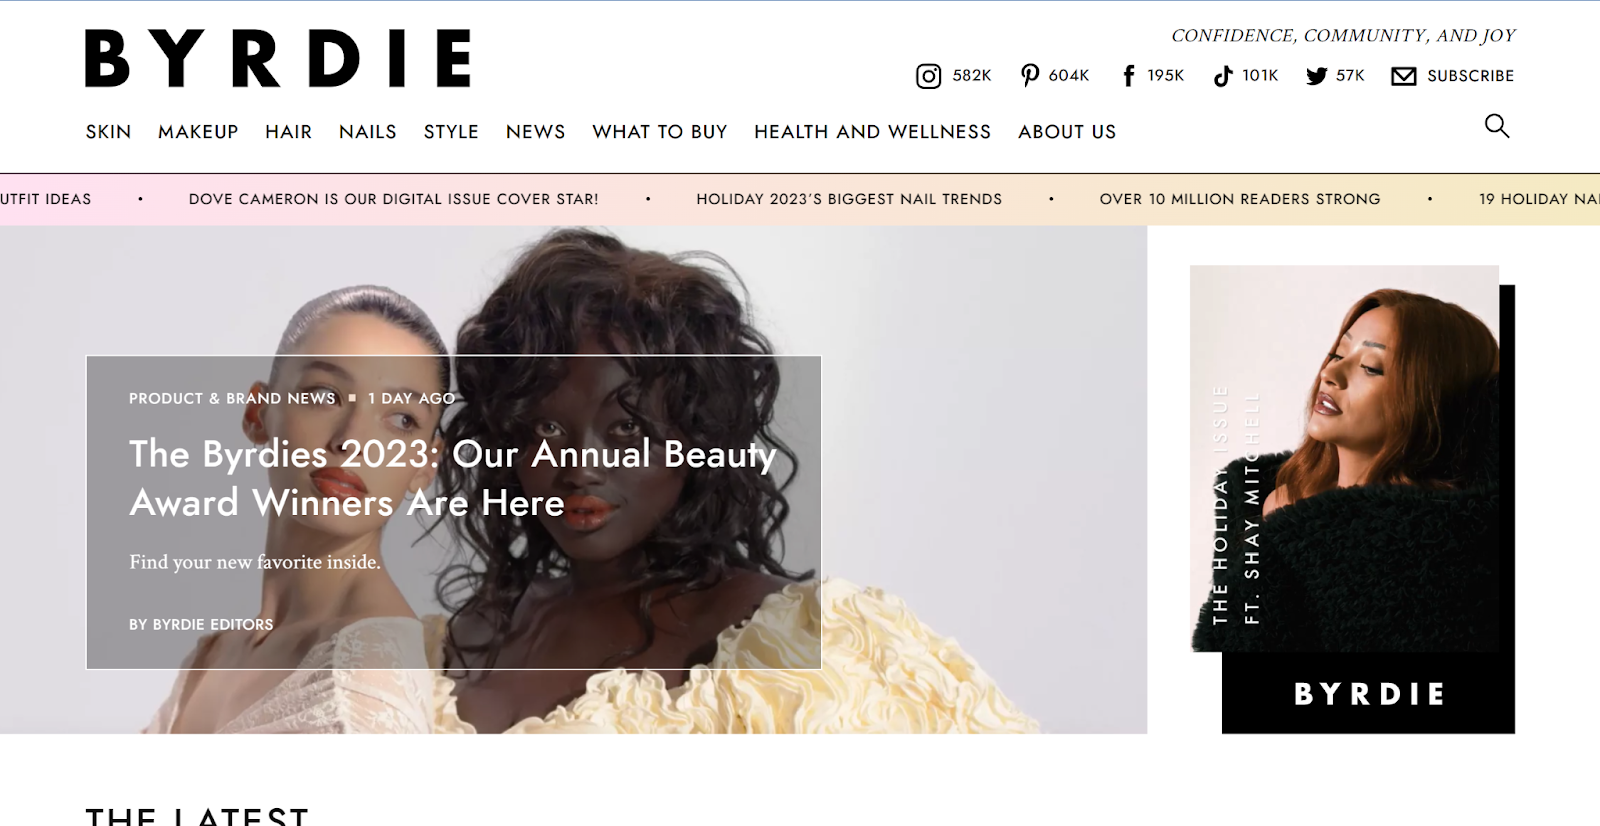 Byrdie is a popular blog covering skin, makeup, style, wellness and much more.